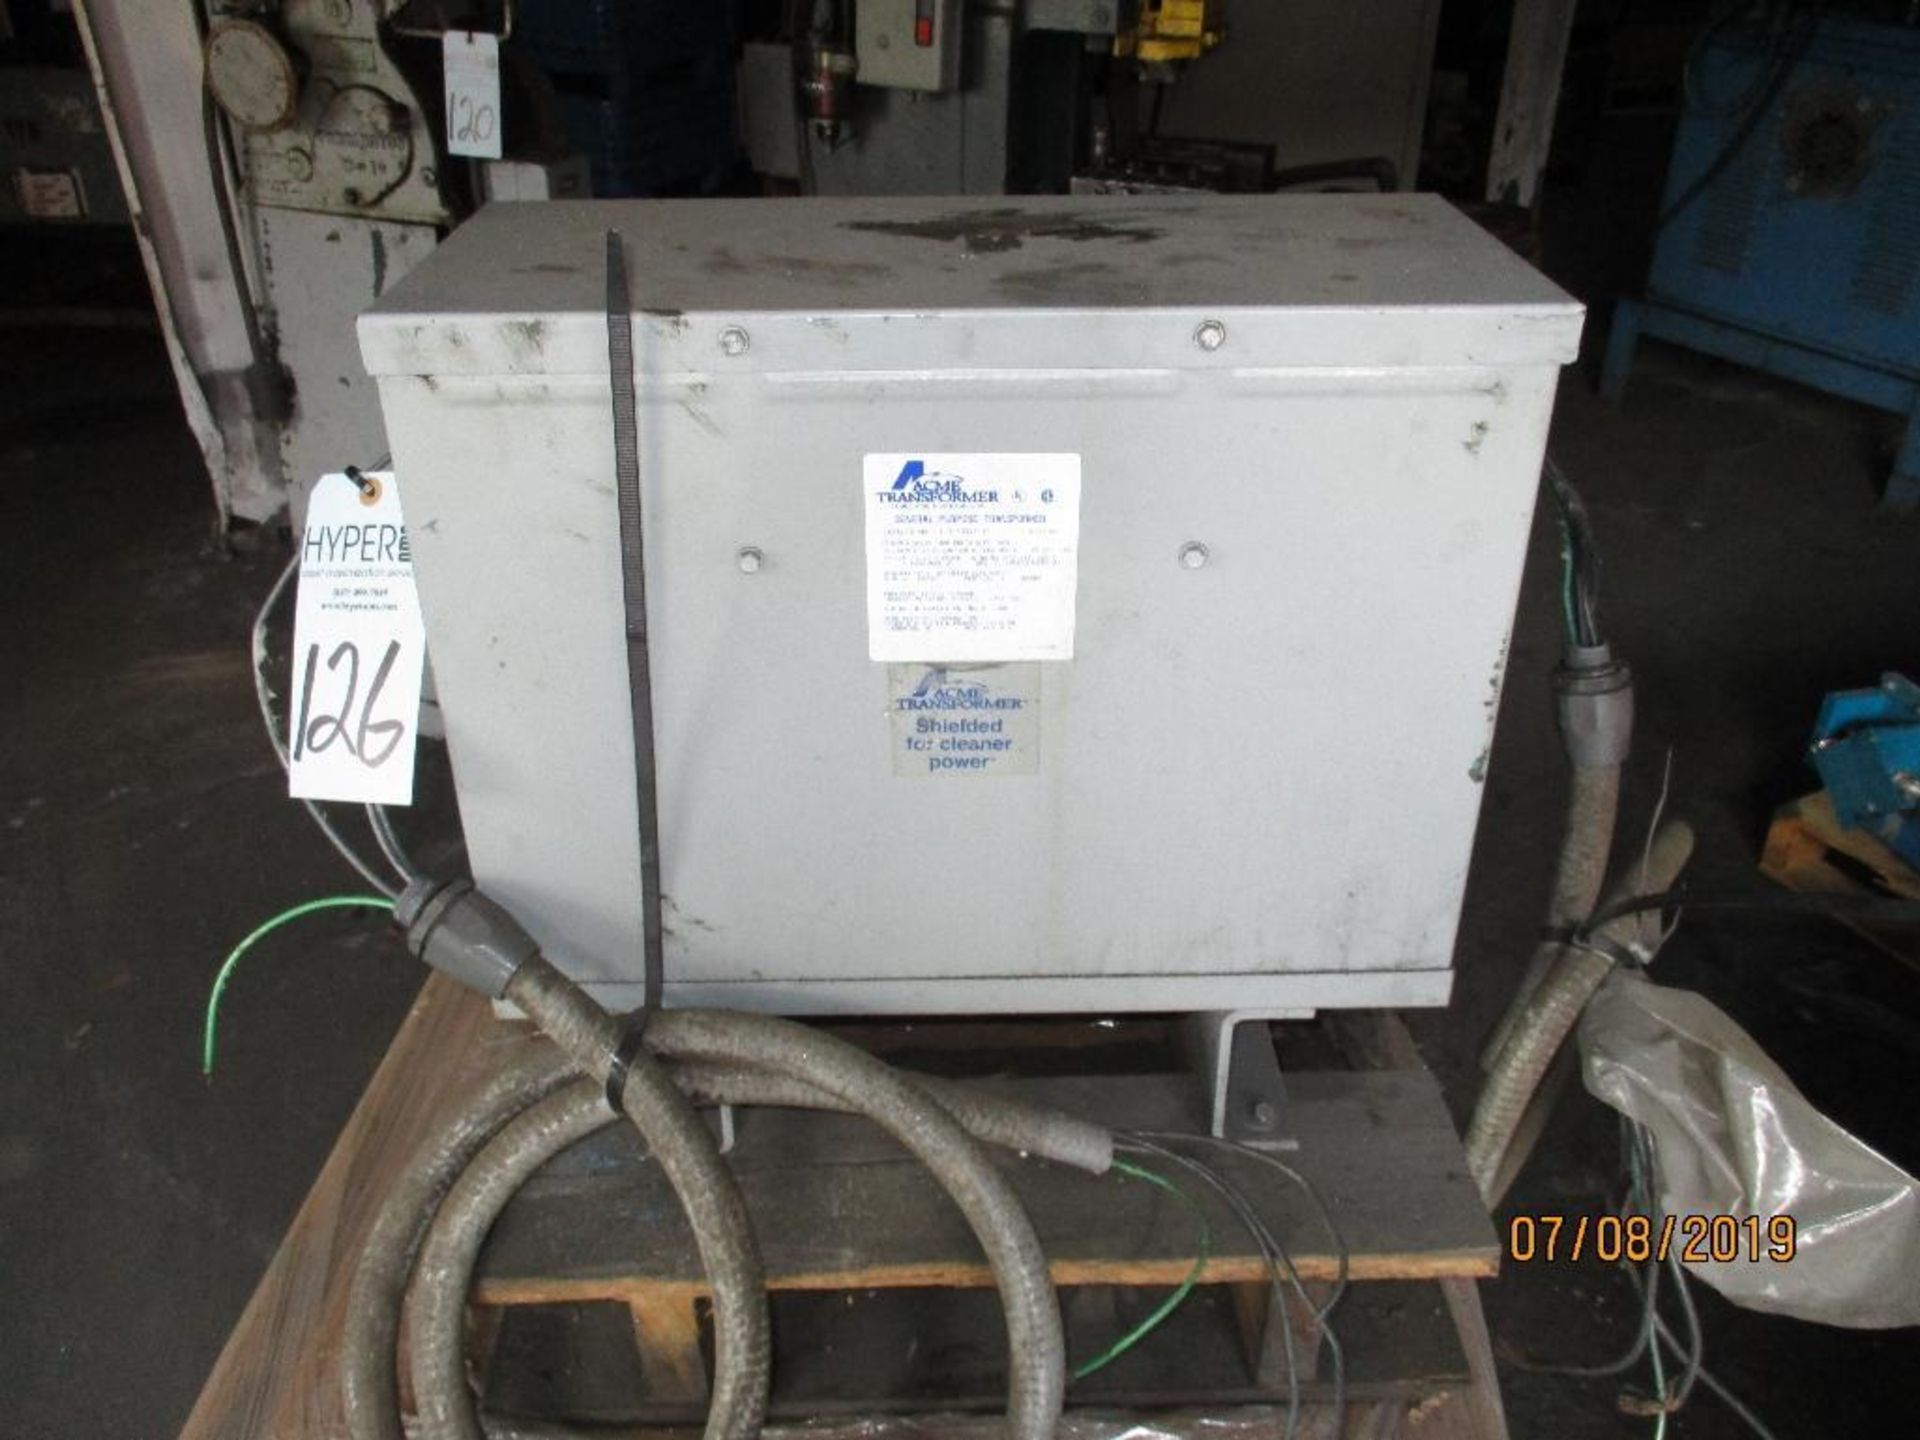 Acme Transformer Cat No. T-3-53341-18, 15kva, 60hz, 3ph, 245lbs, Located at 600 Old Hull Rd. Athens,